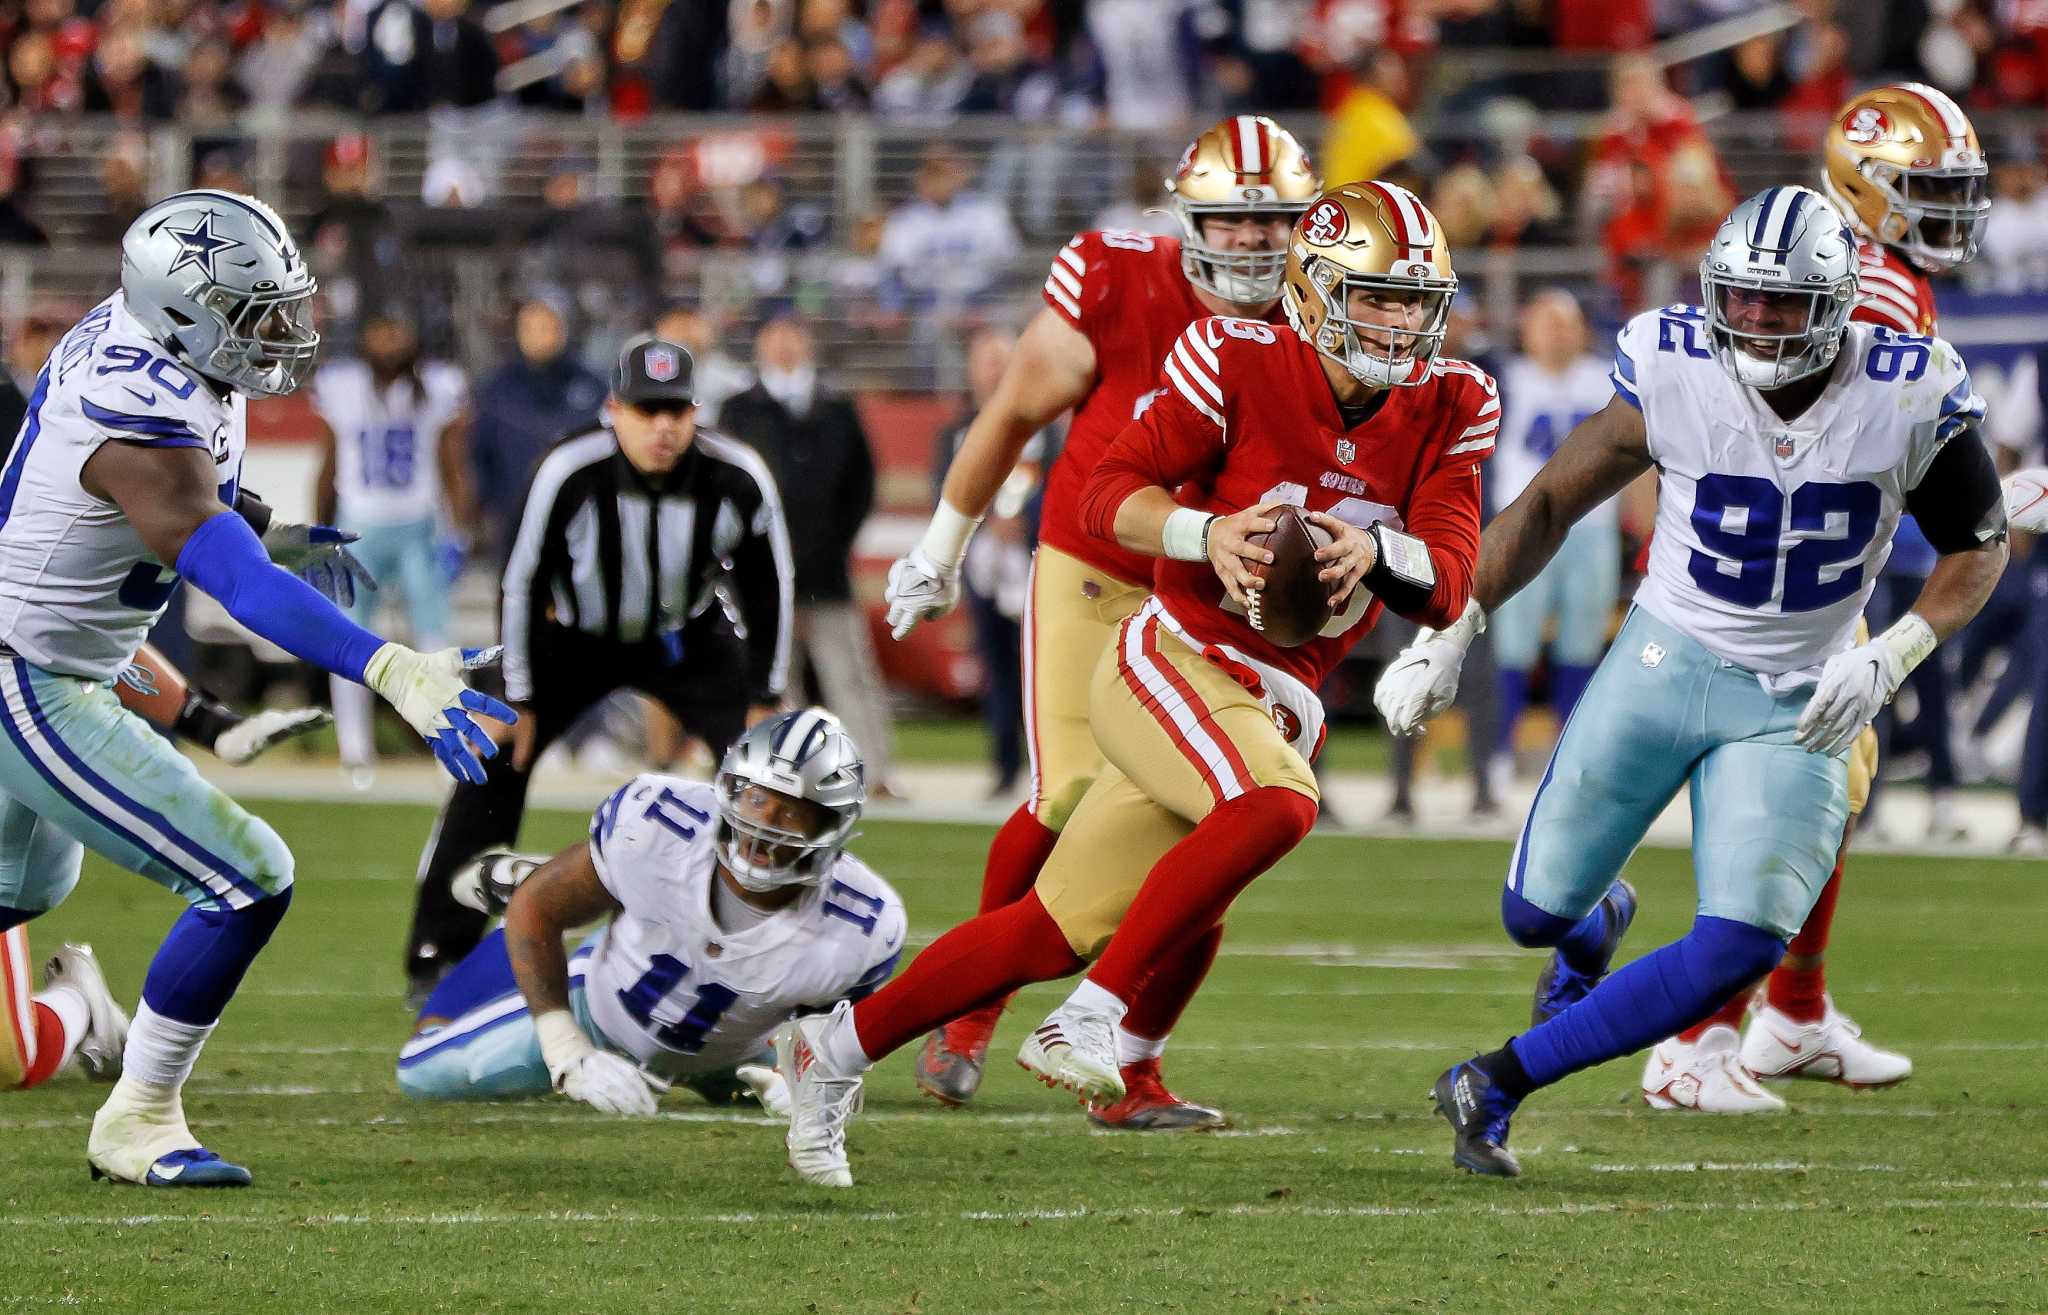 Echoing 49ers' past playoff victories over Cowboys, Brock Purdy